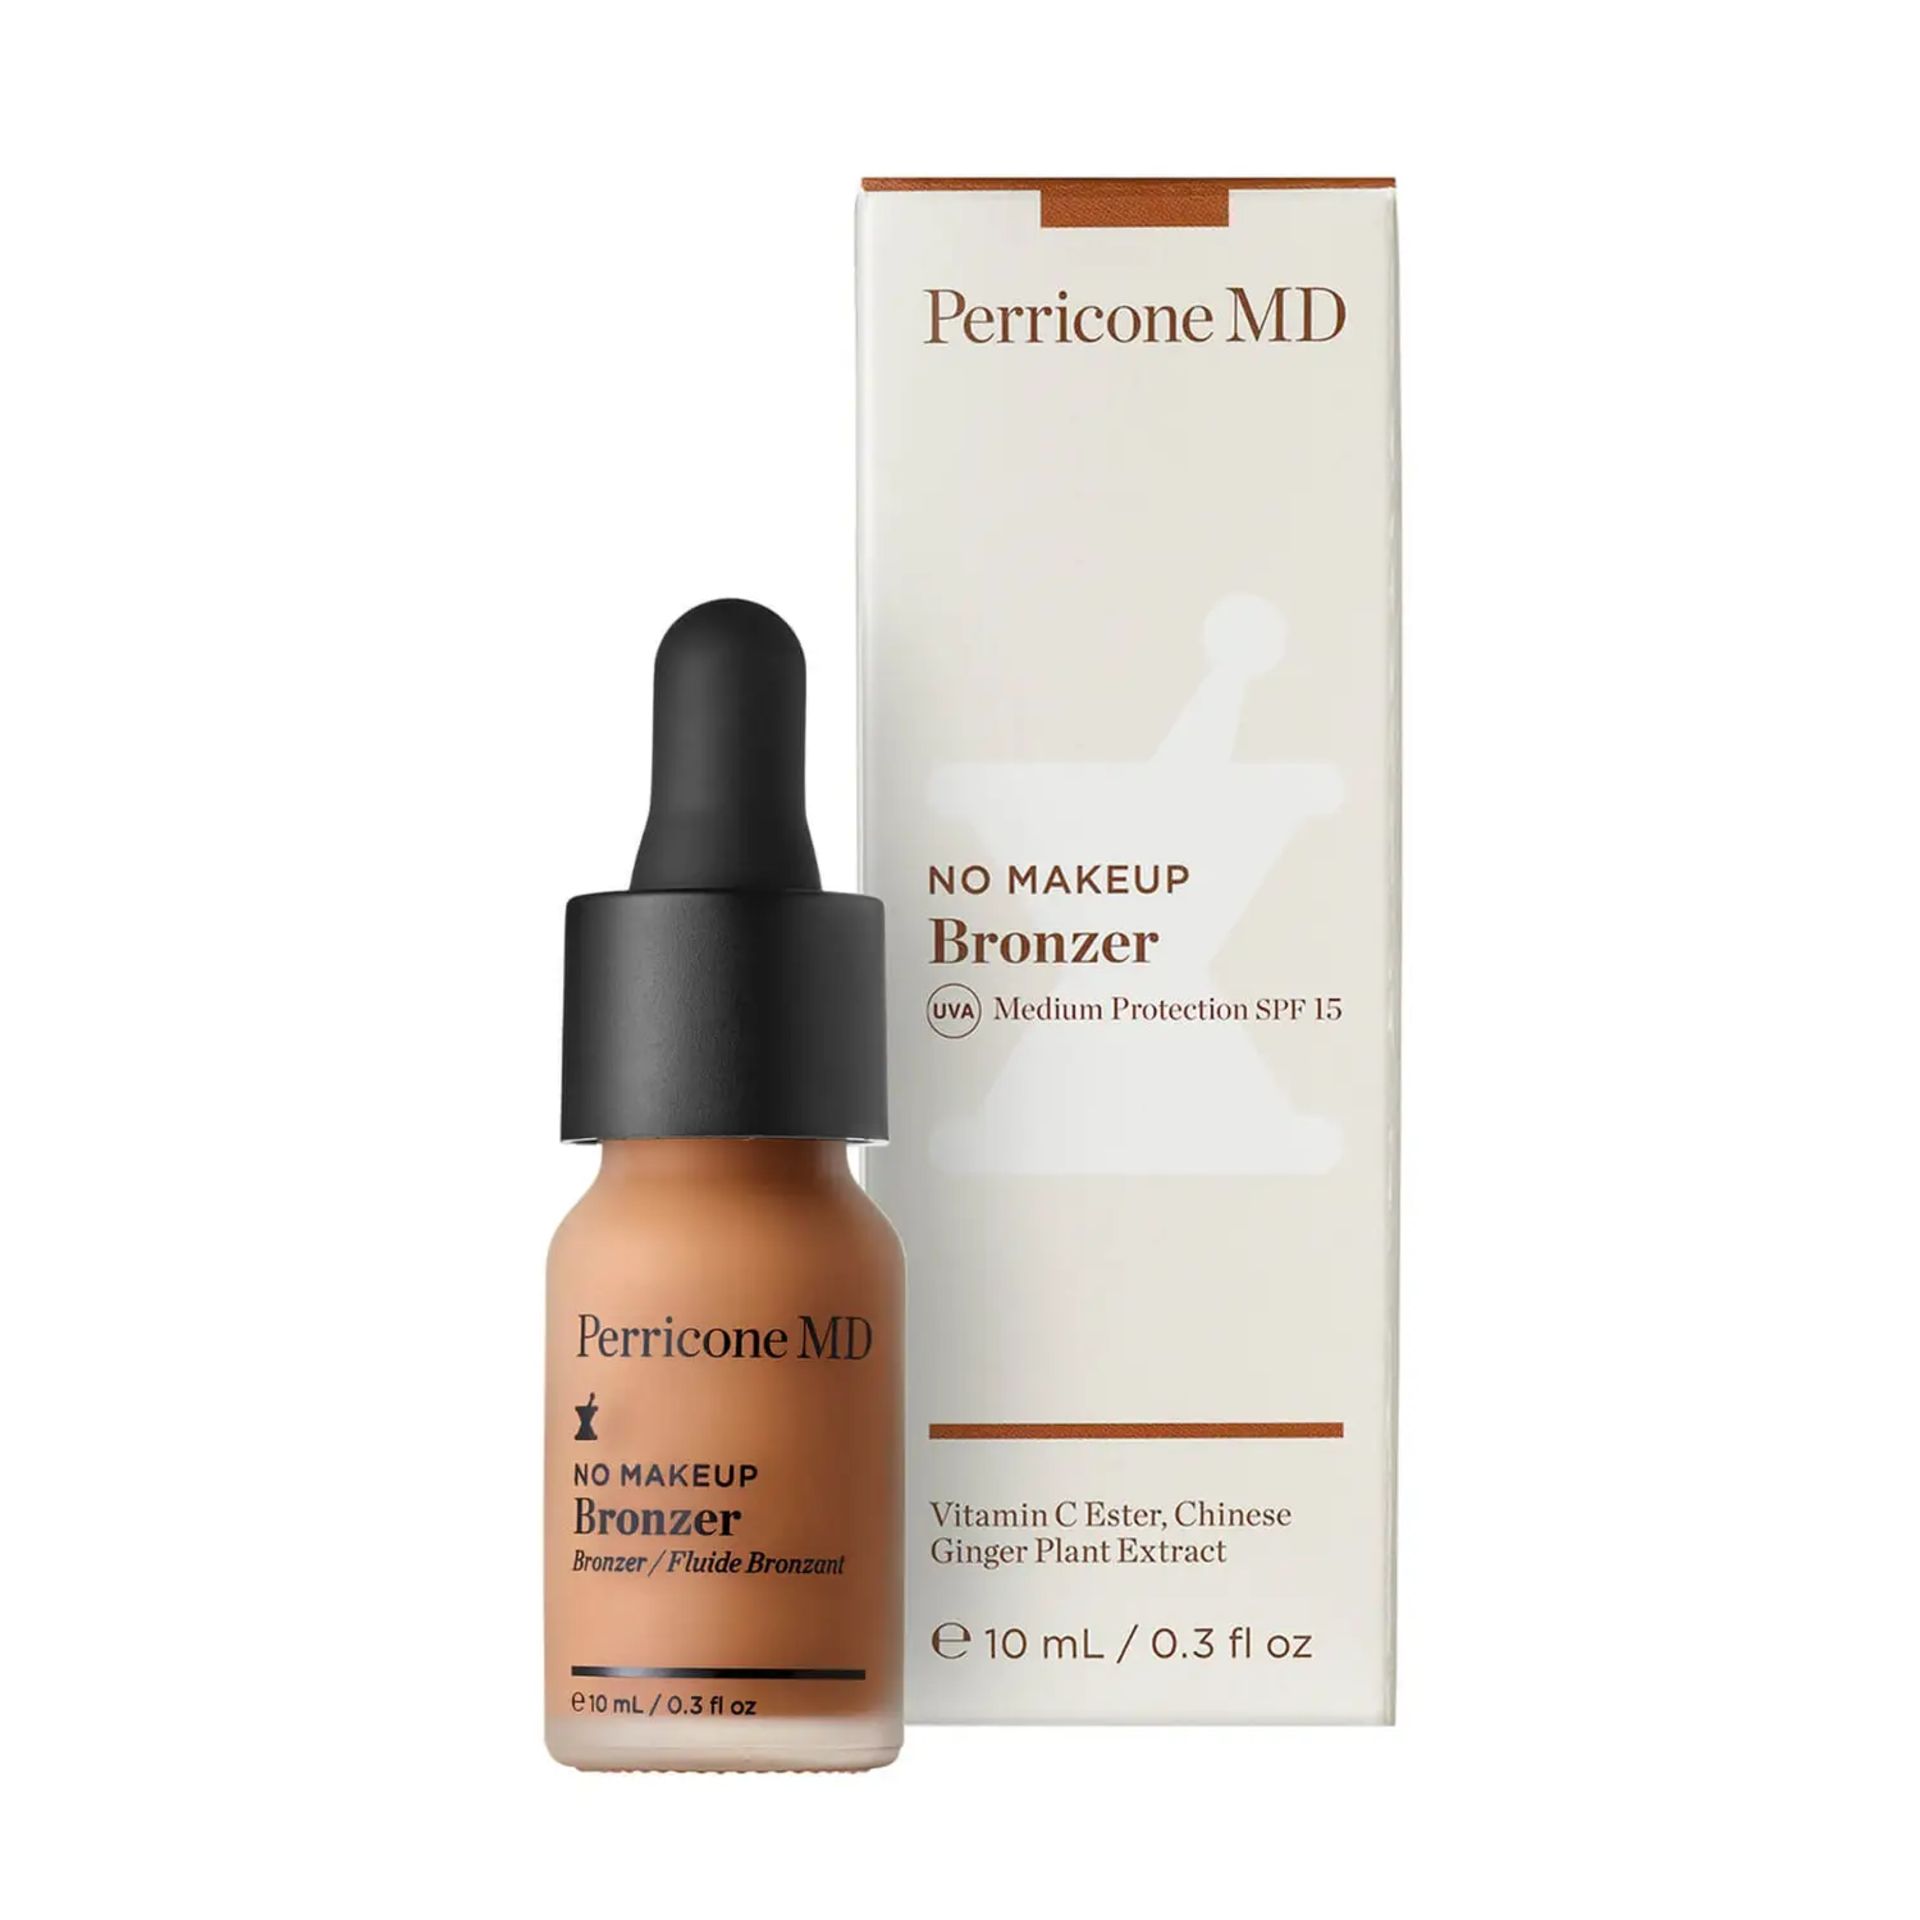 12 x Perricone MD NO Makeup Bronzer SPF 15 RRP £360